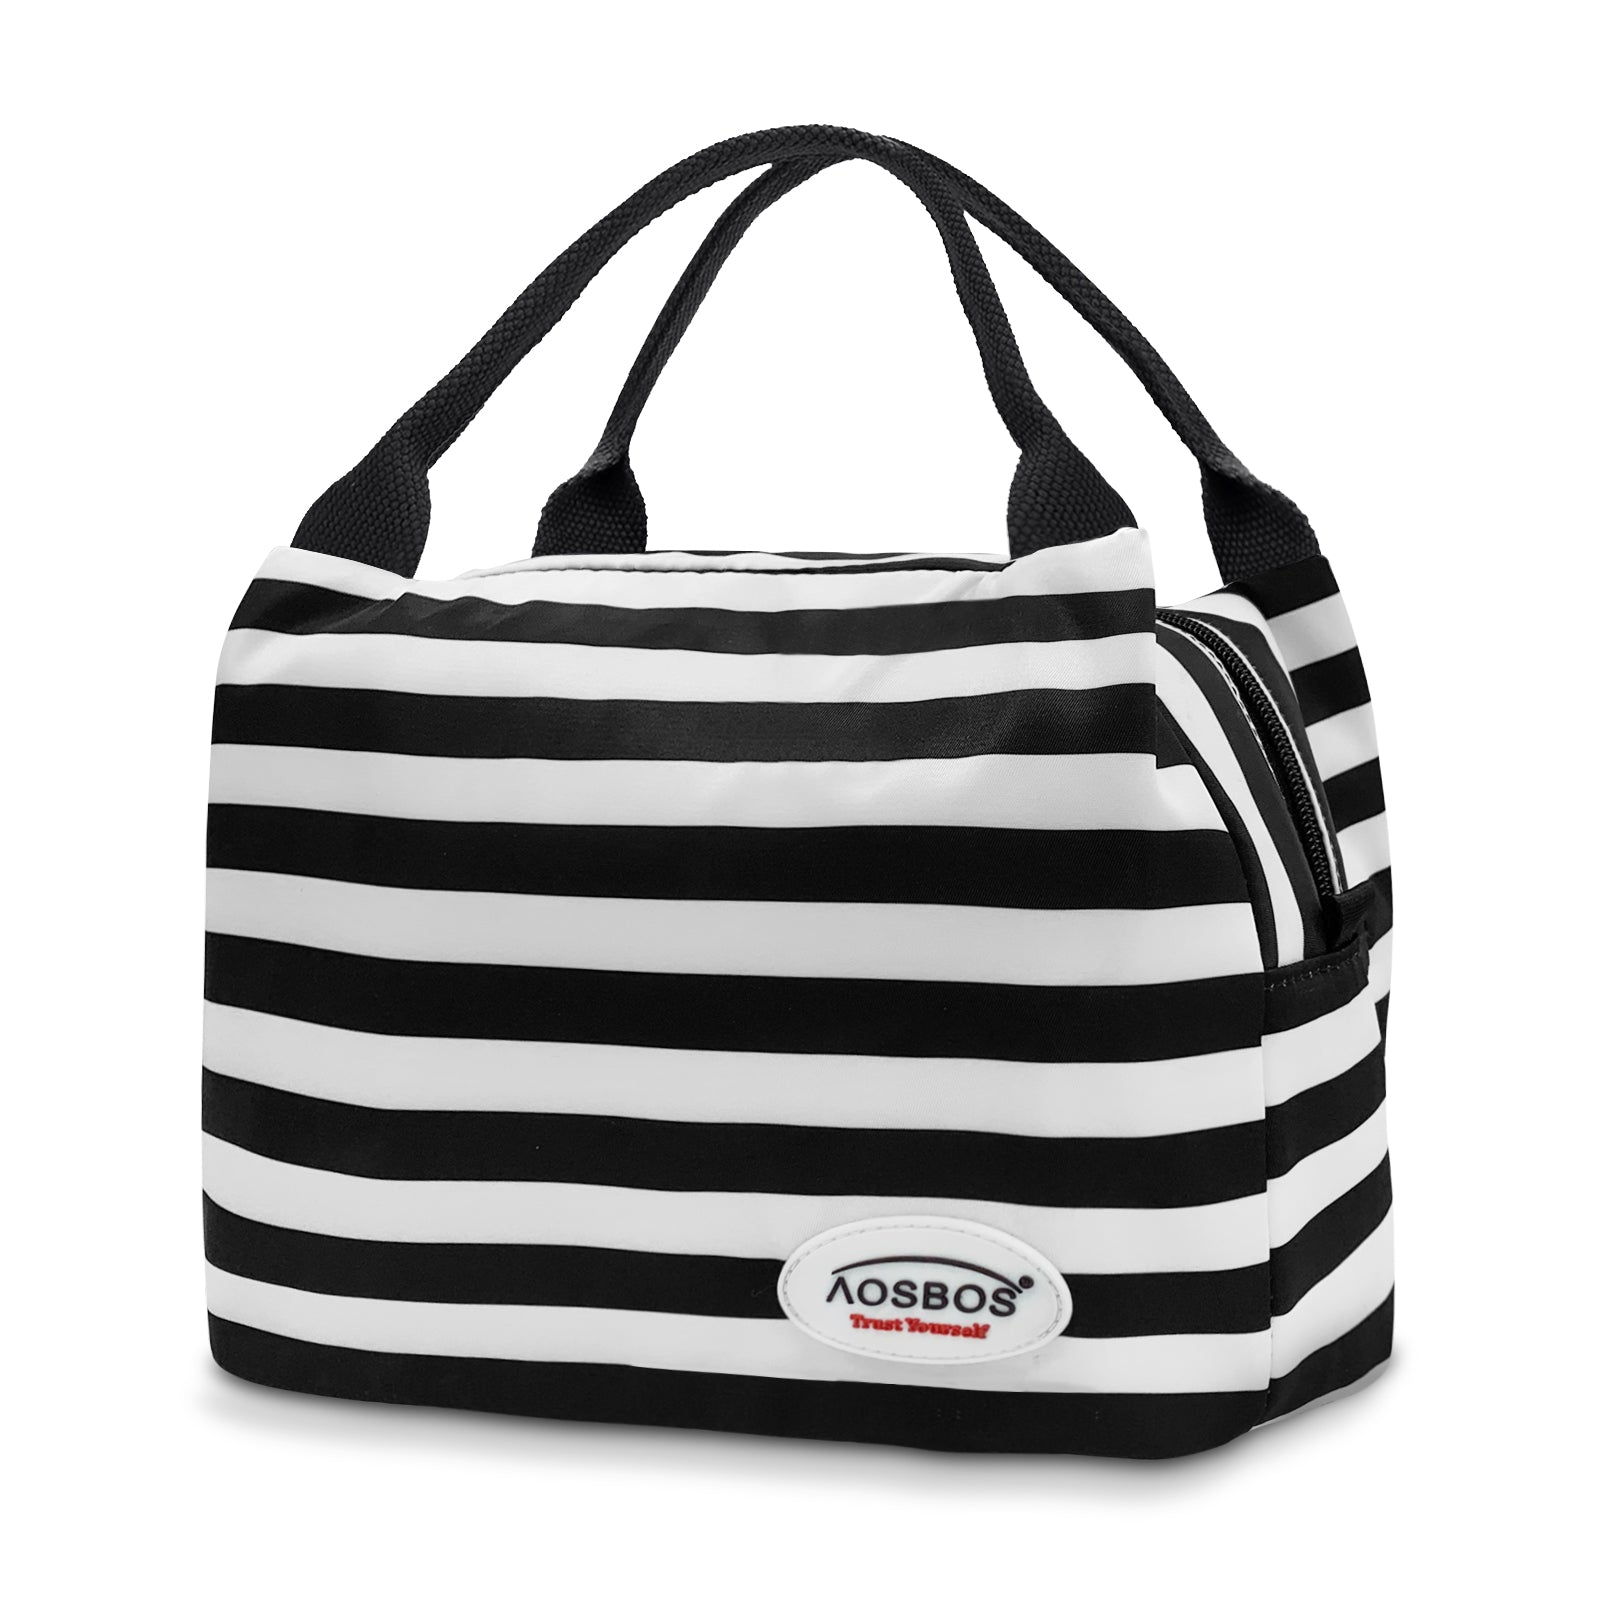 Insulated Lunch Tote Large Kalo Grey